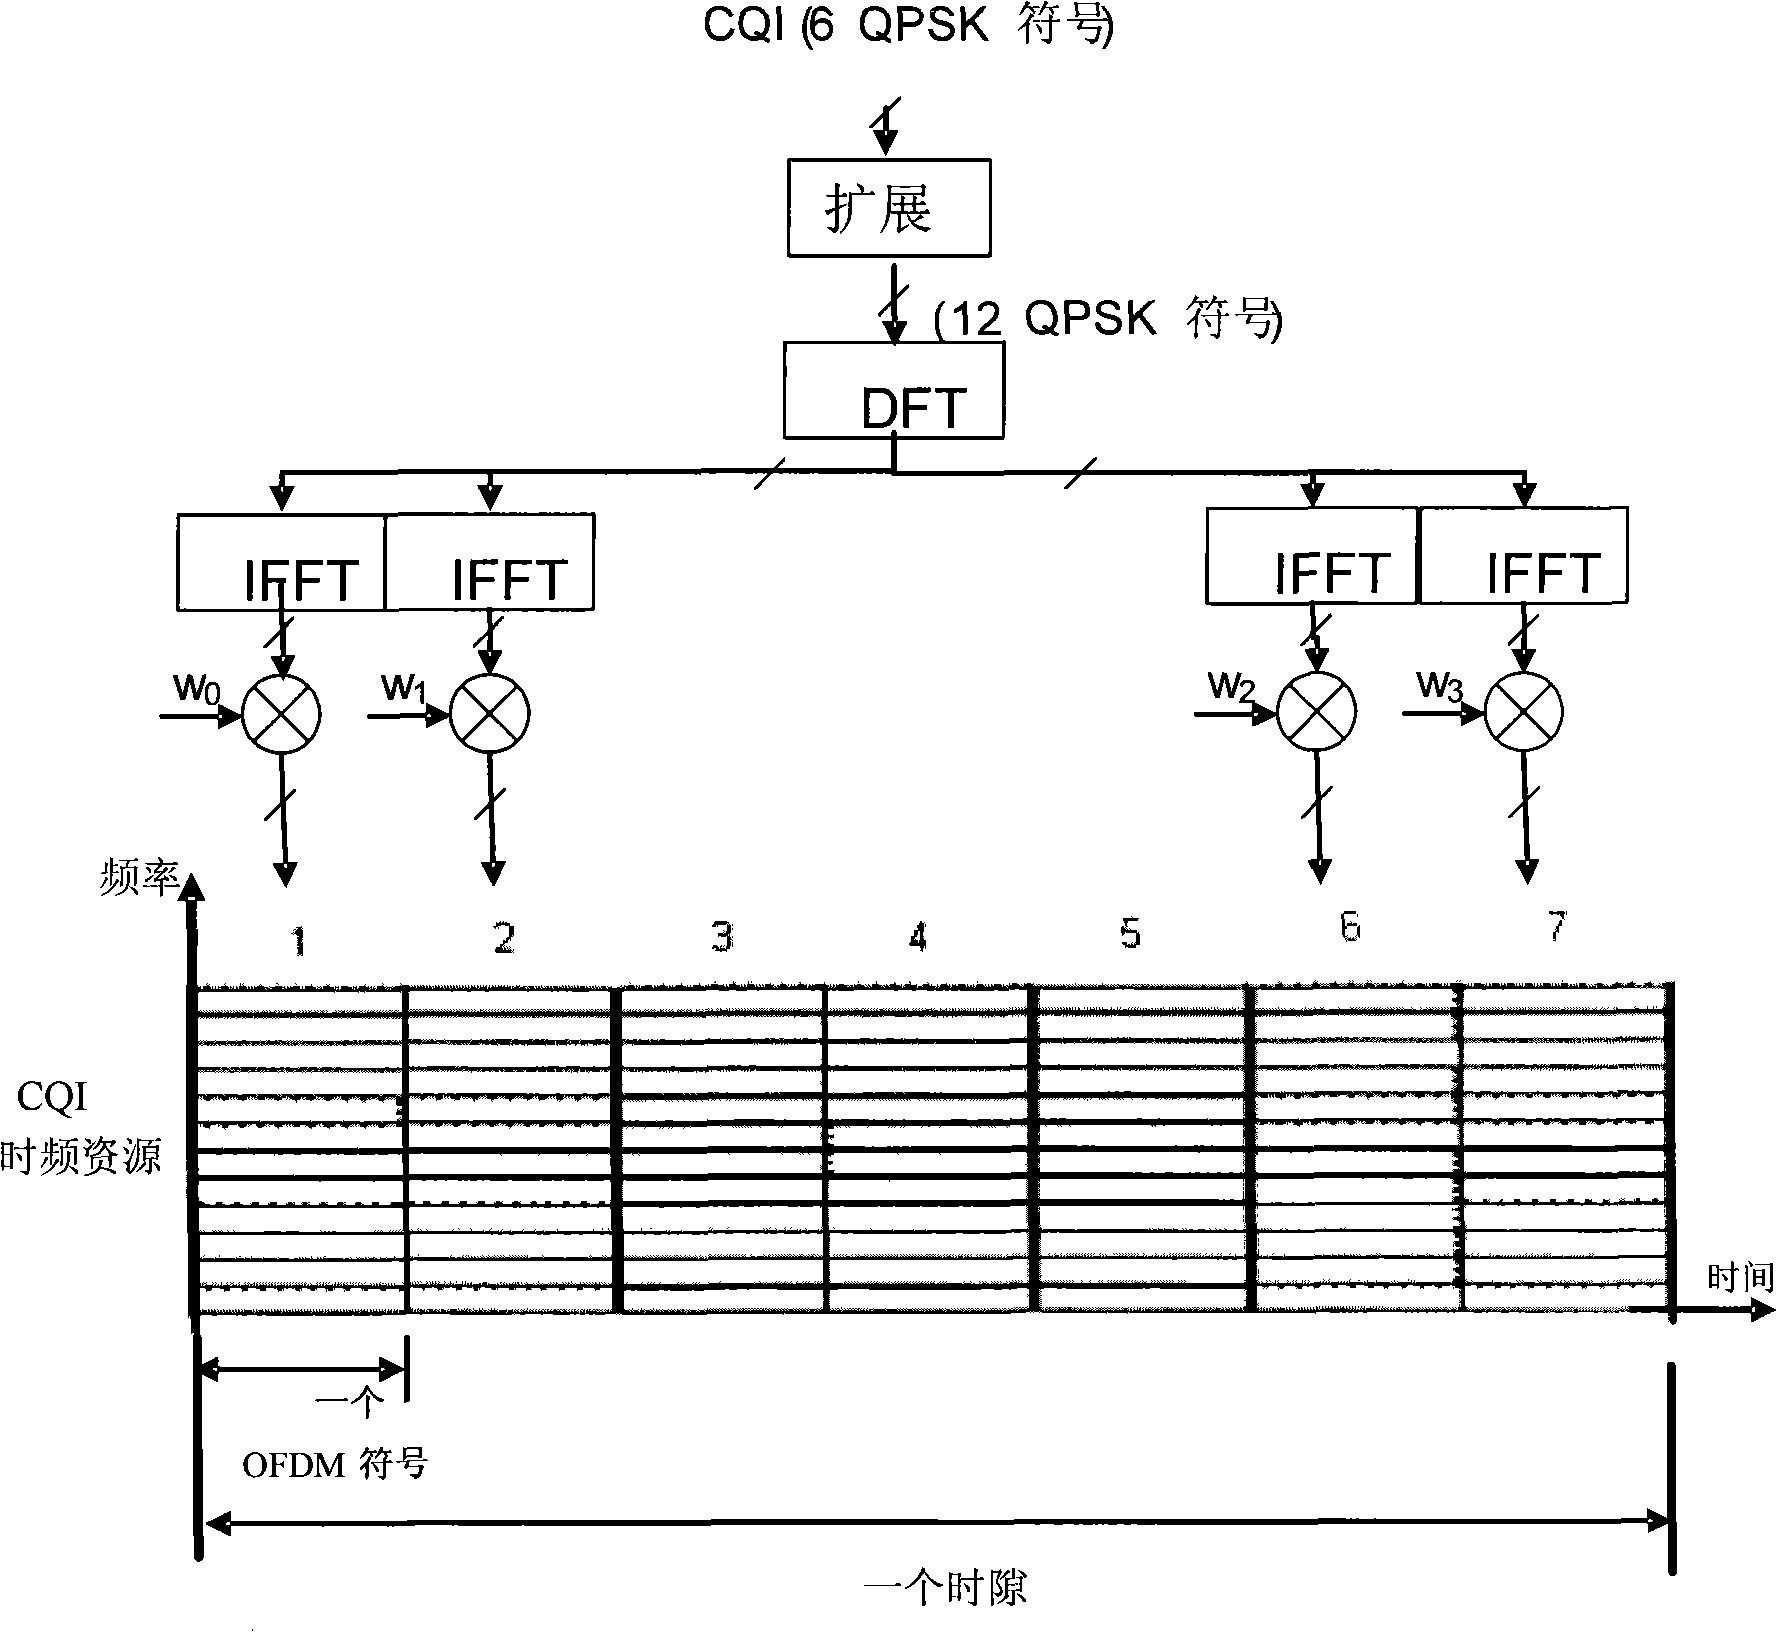 Method and system for implementing channel quality indication information transmission, subscriber terminal and base station